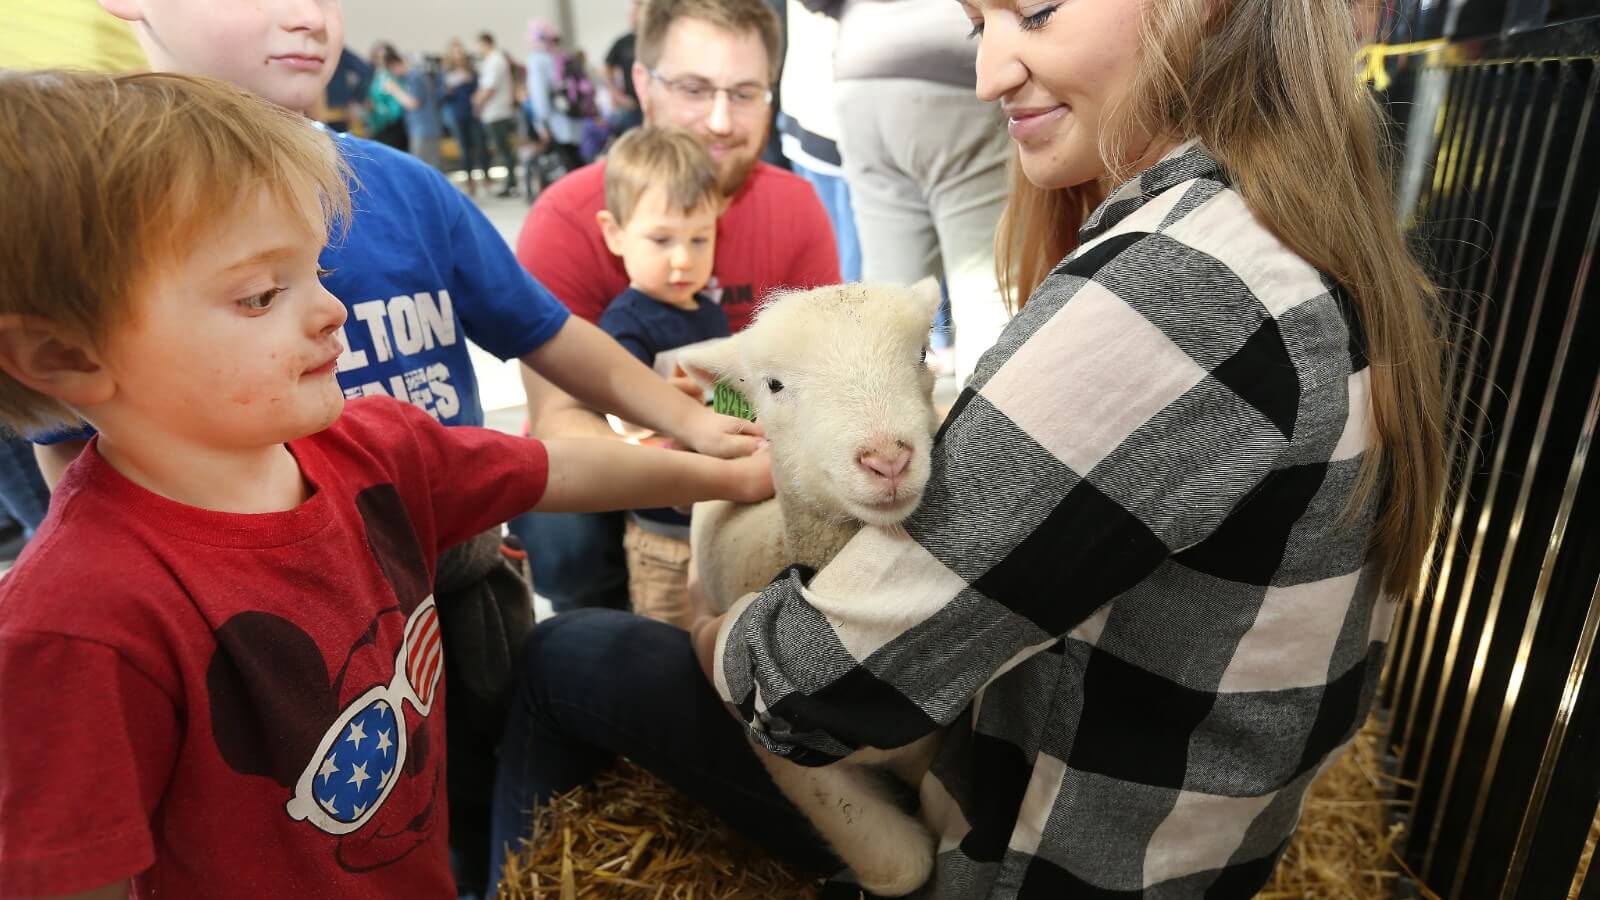 A student volunteer holds a lamb for Spring Fest attendees to feel at the petting zoo.